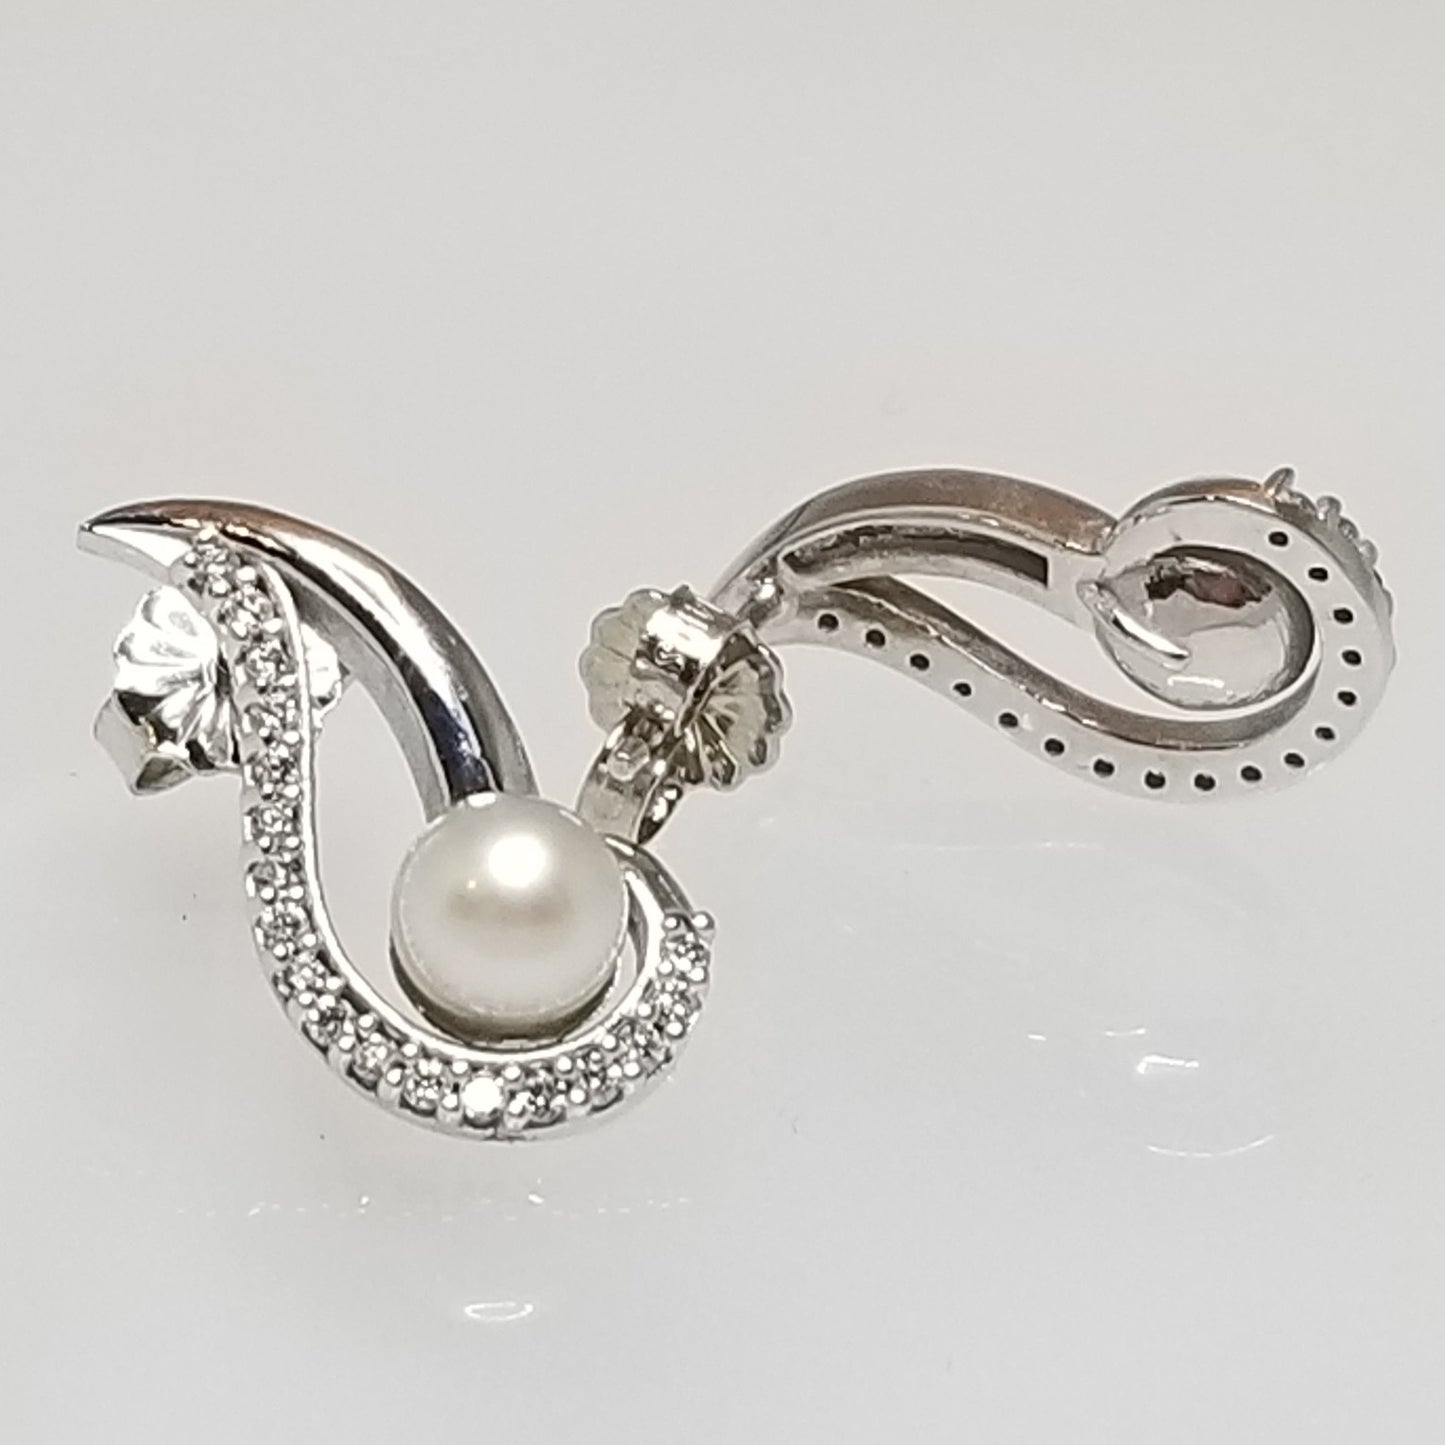 Ready to ship Pearl and diamond swirl earrings in 14k white gold